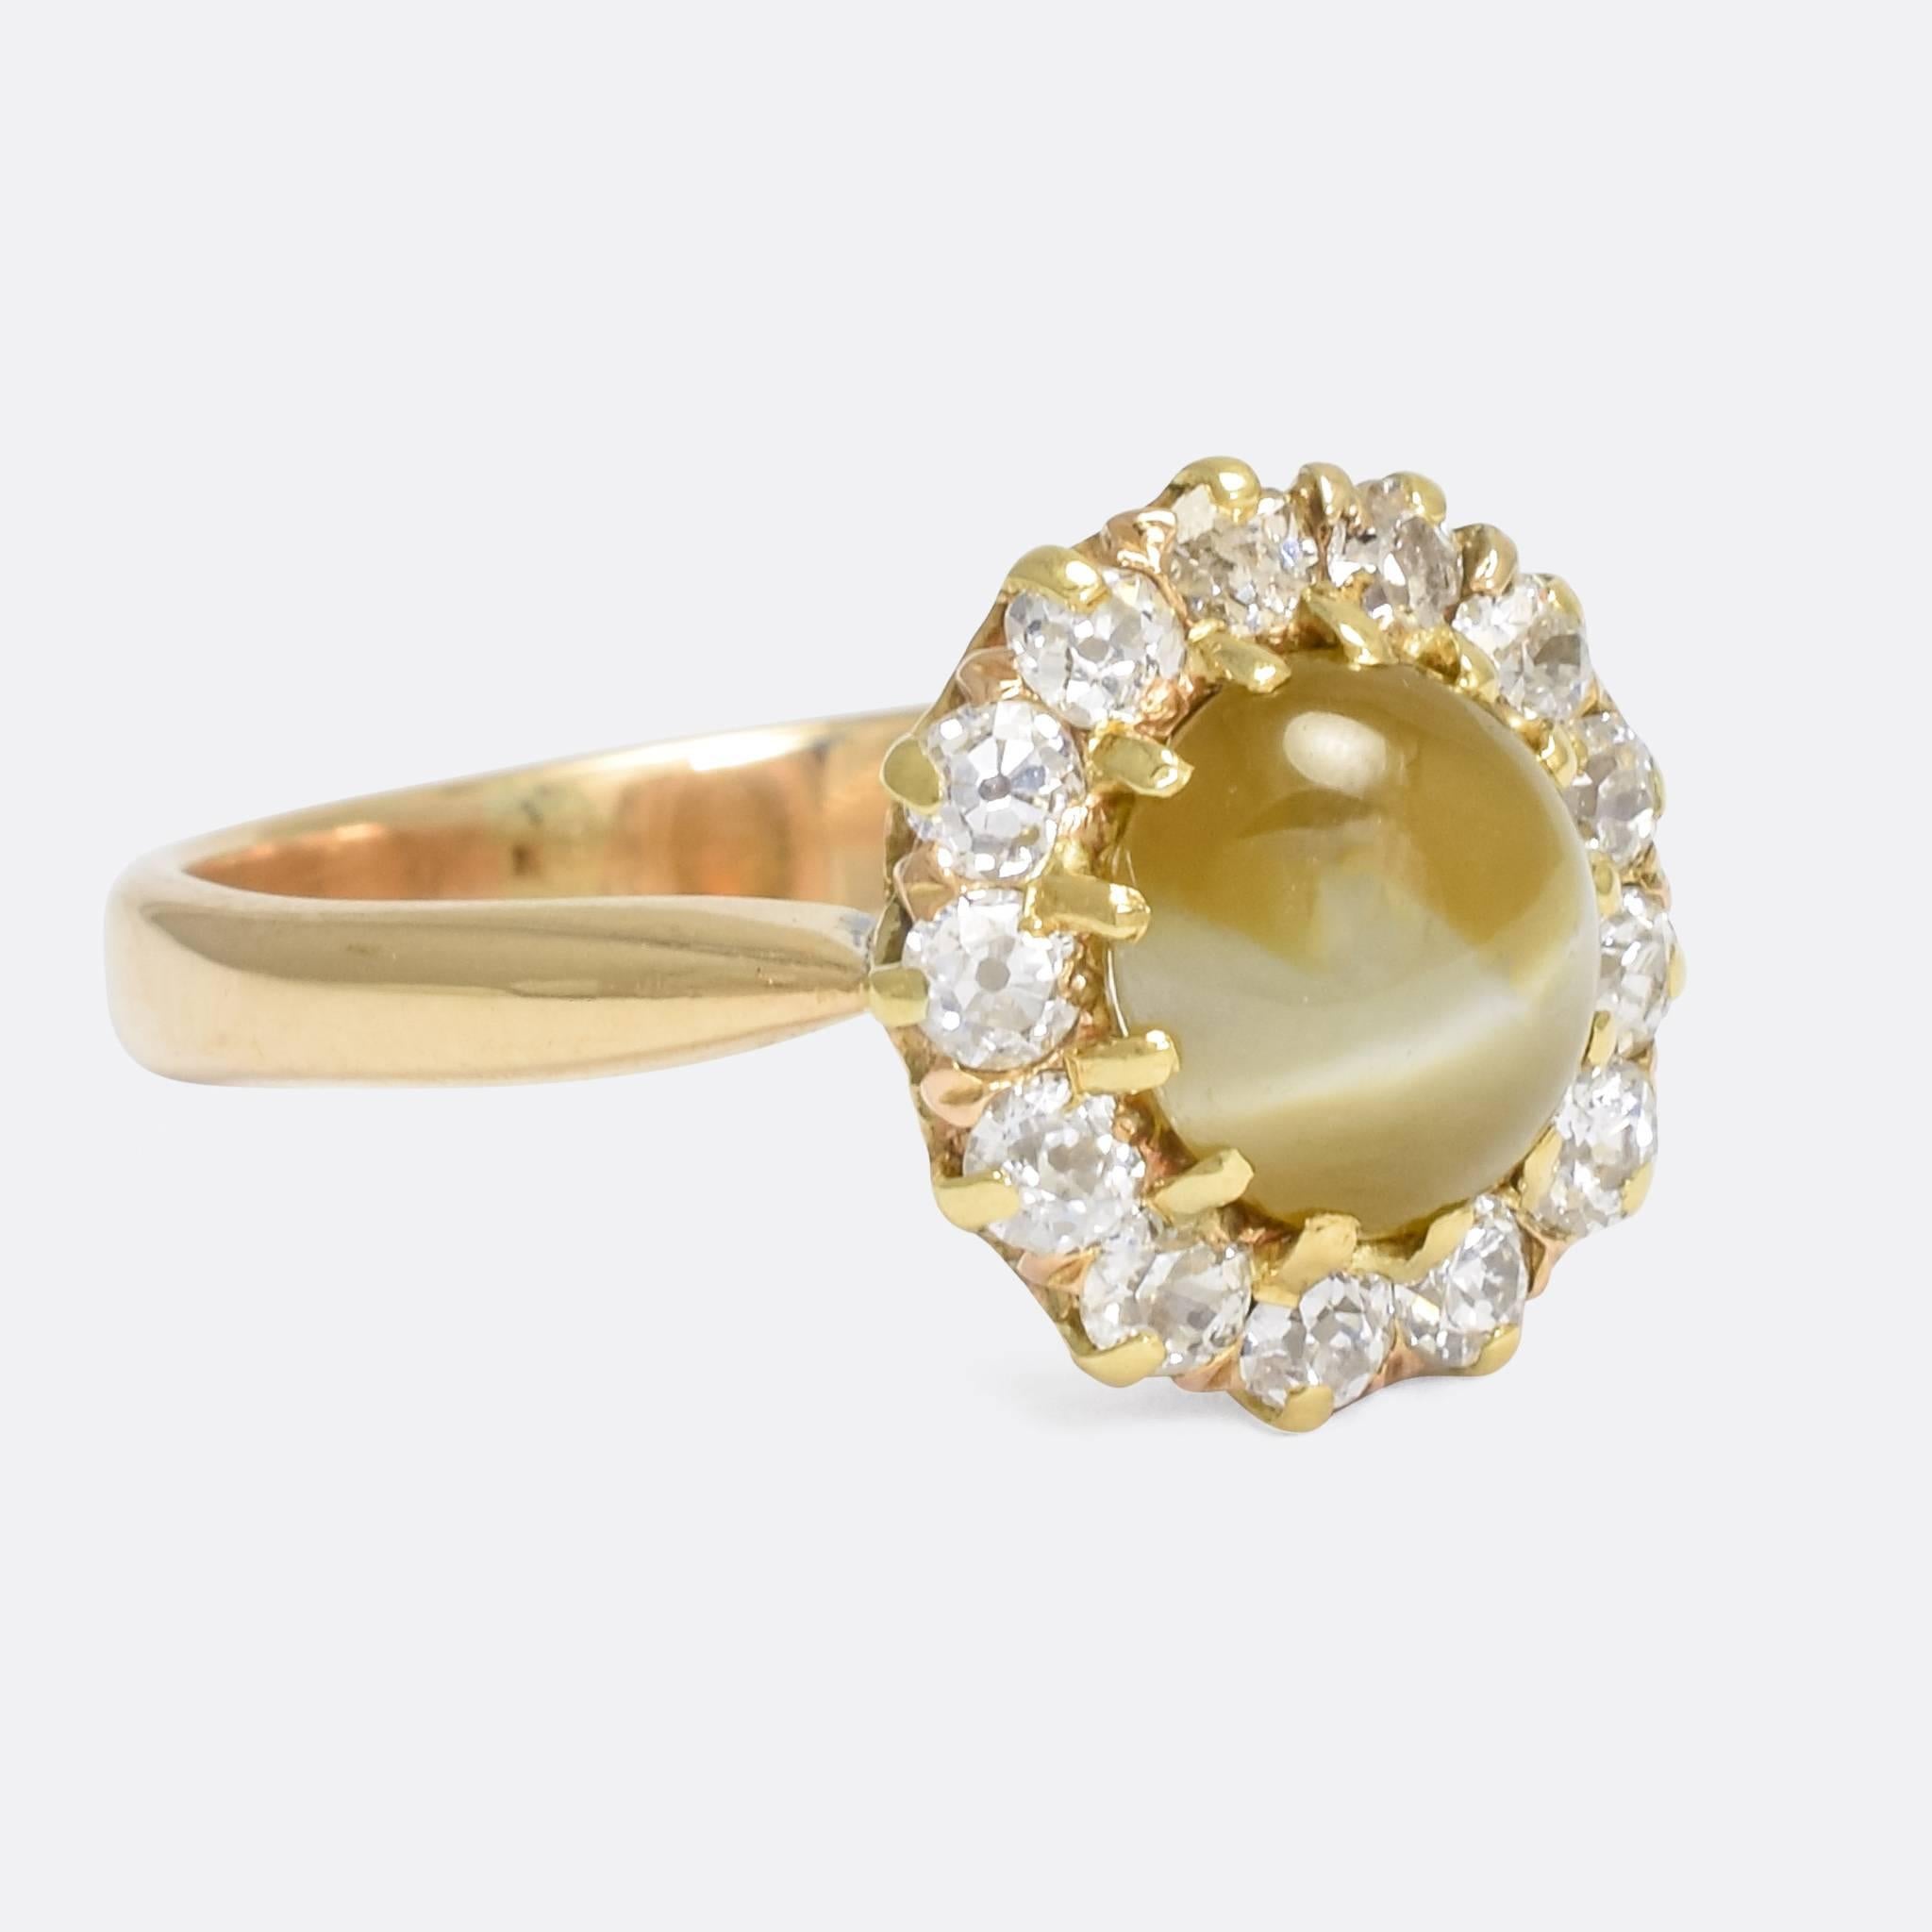 A fine Victorian cluster ring set with a stunning cat's eye chrysoberyl within a halo of old cut diamonds. The principal stone displays excellent chatoyance, with a fine white line appearing to move across the face of the gem. The diamonds are clean